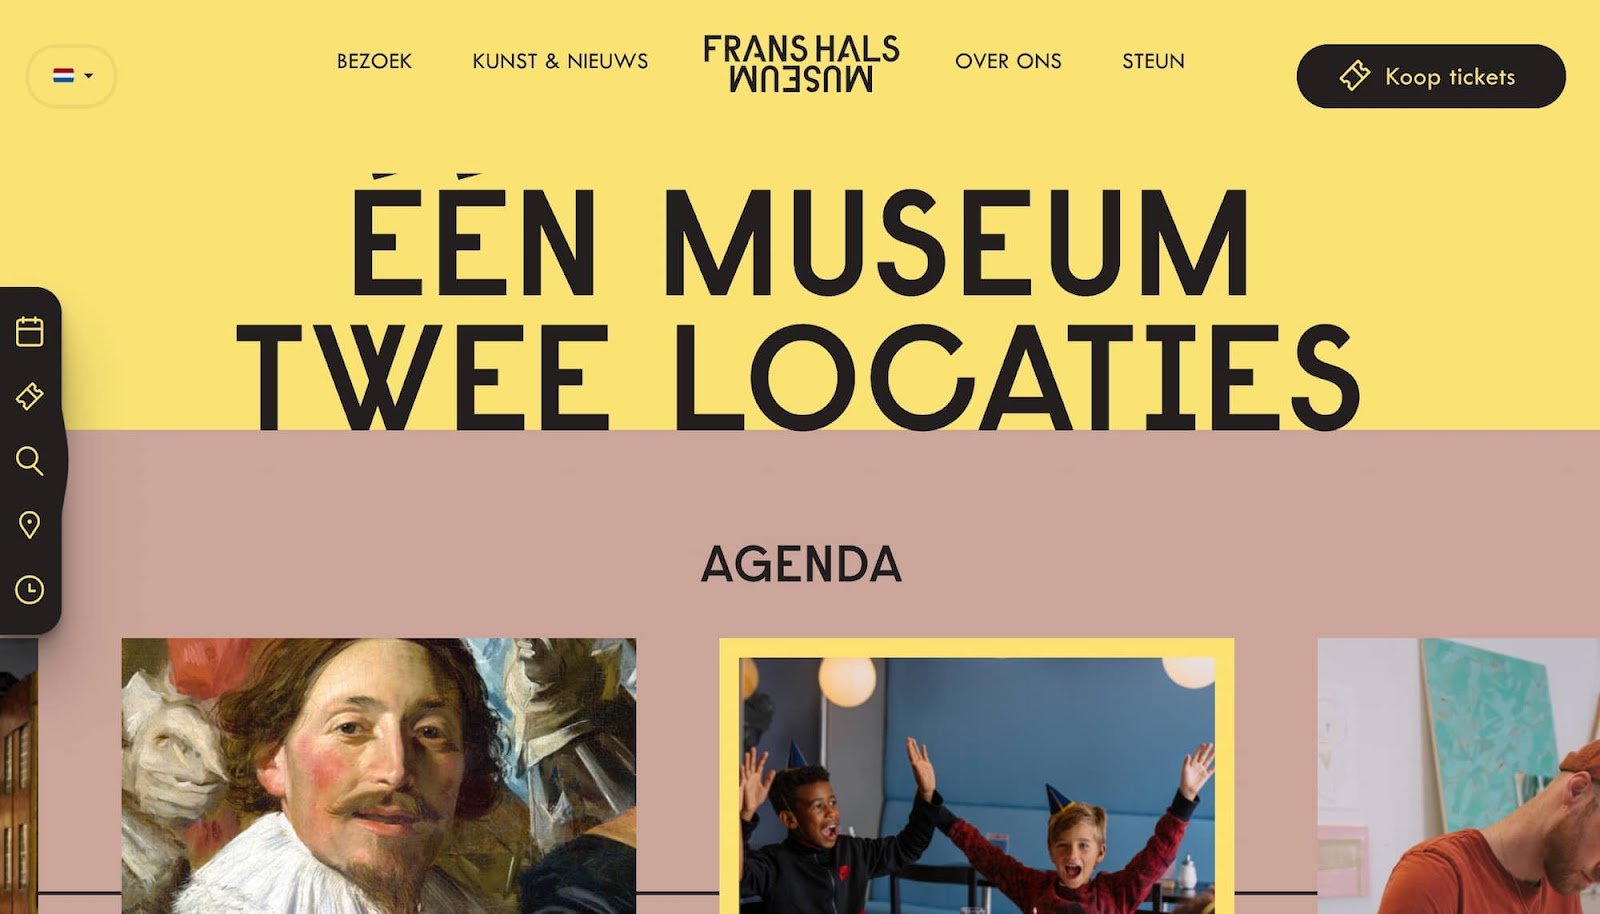 homepage for the museum website the frans hals museum